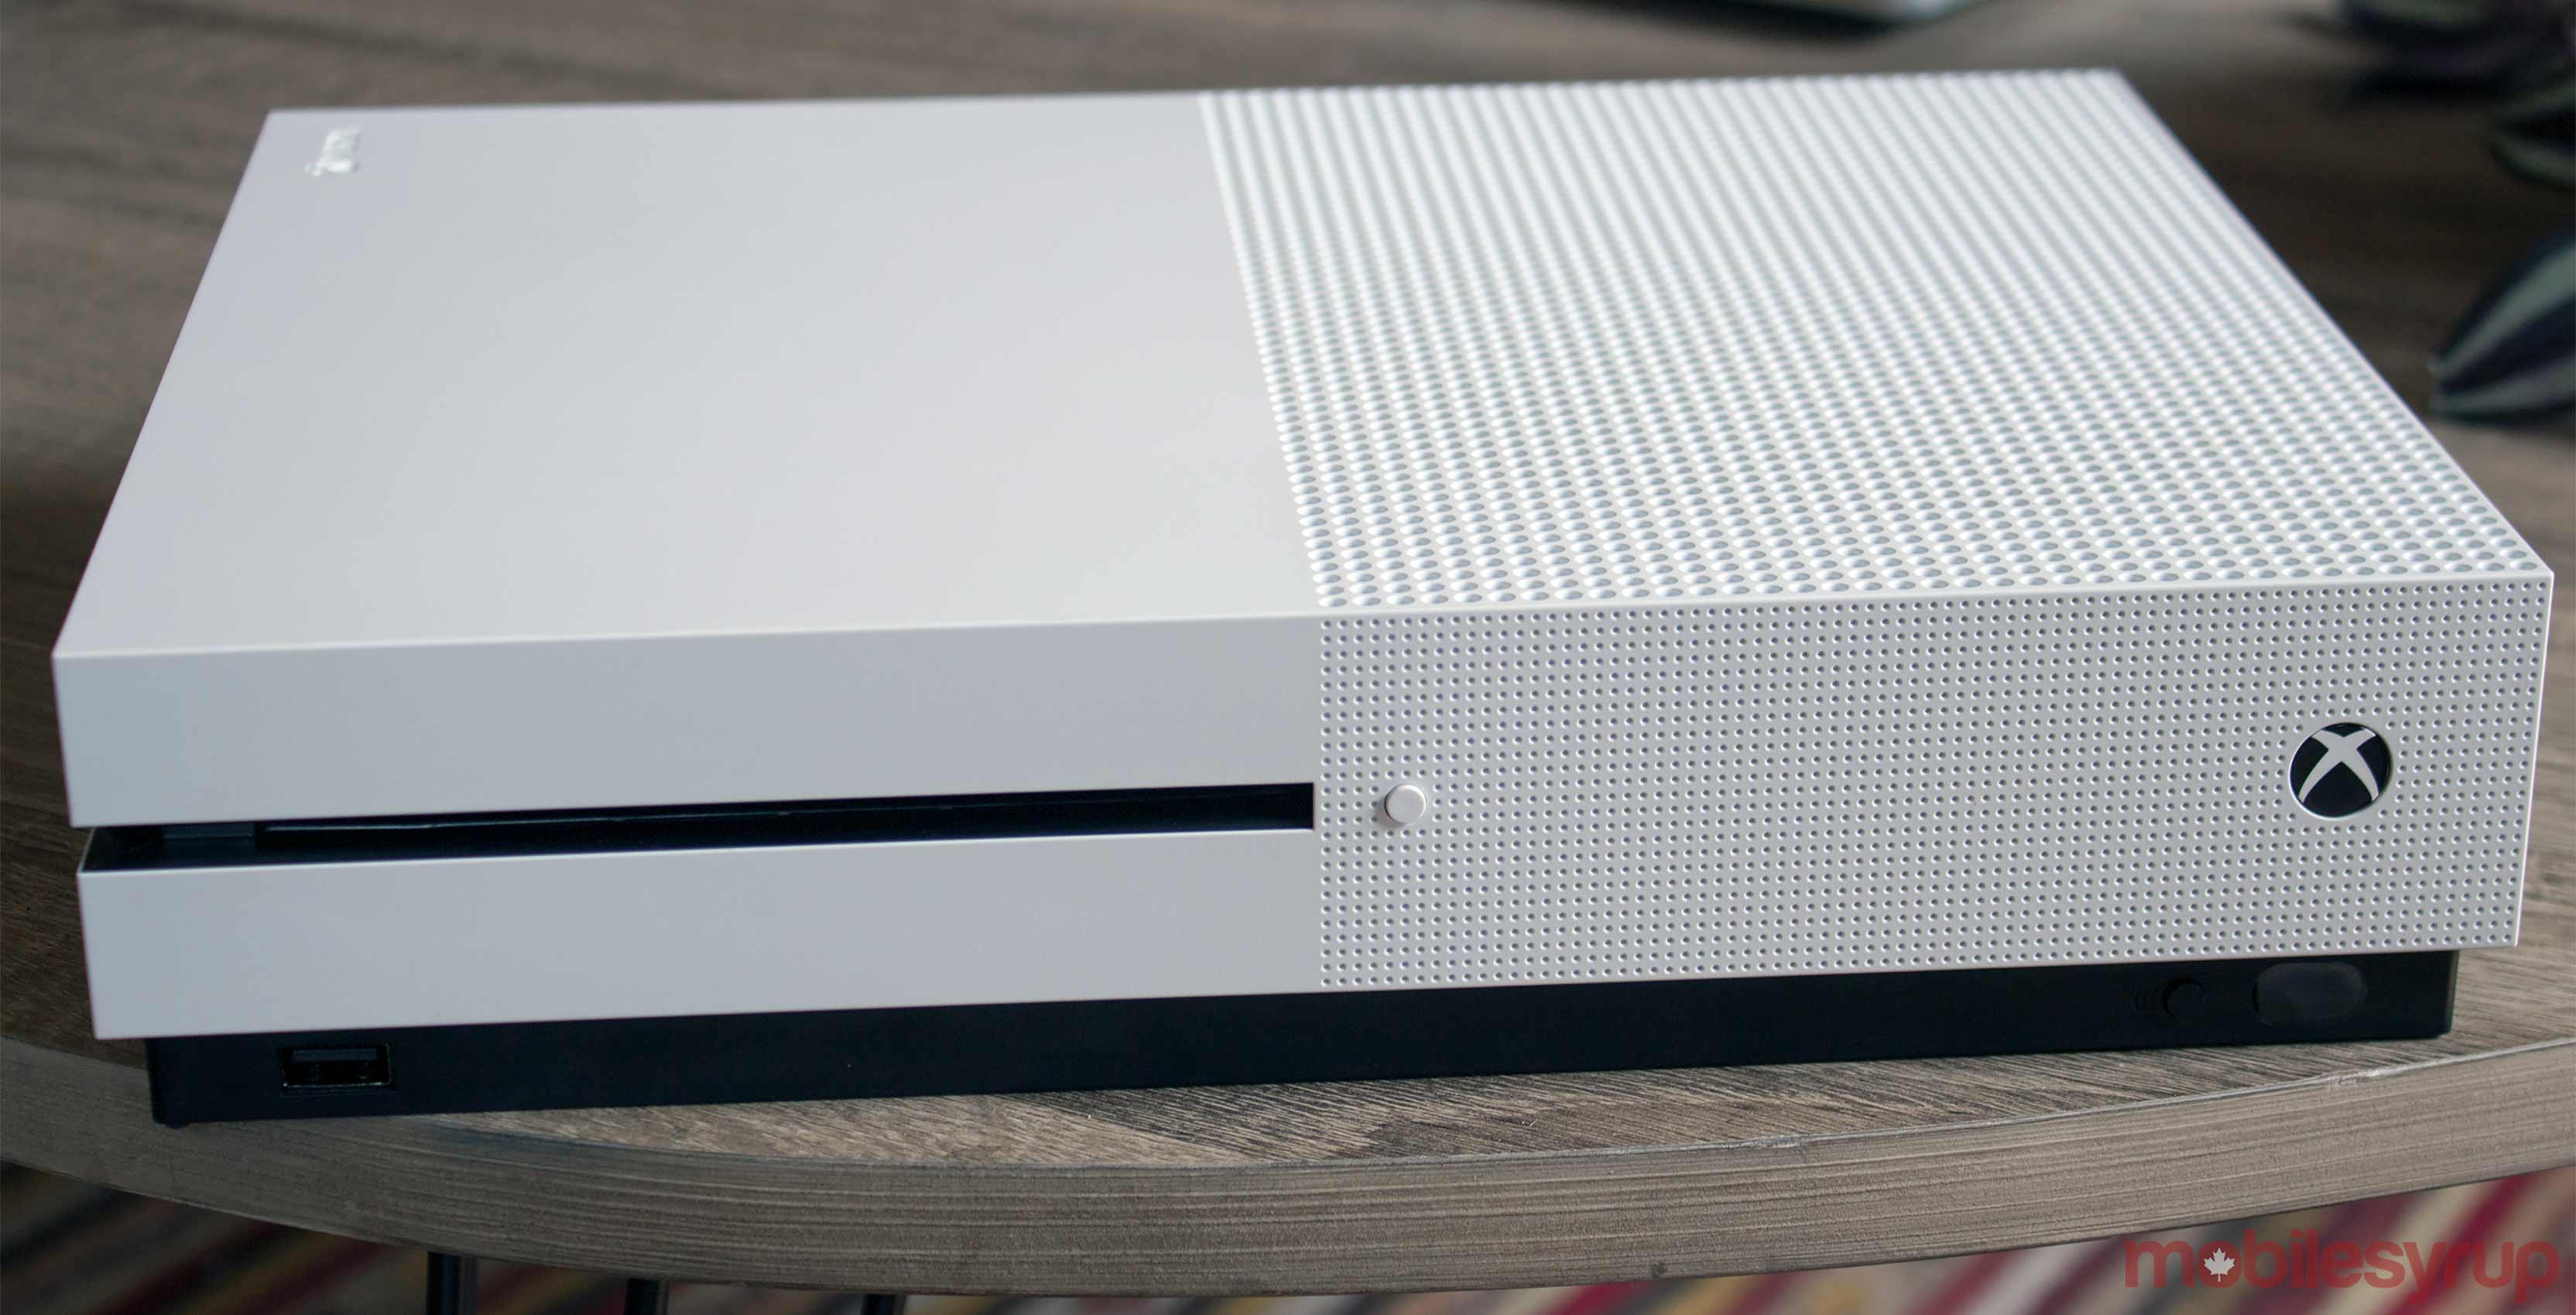 Xbox One S on table